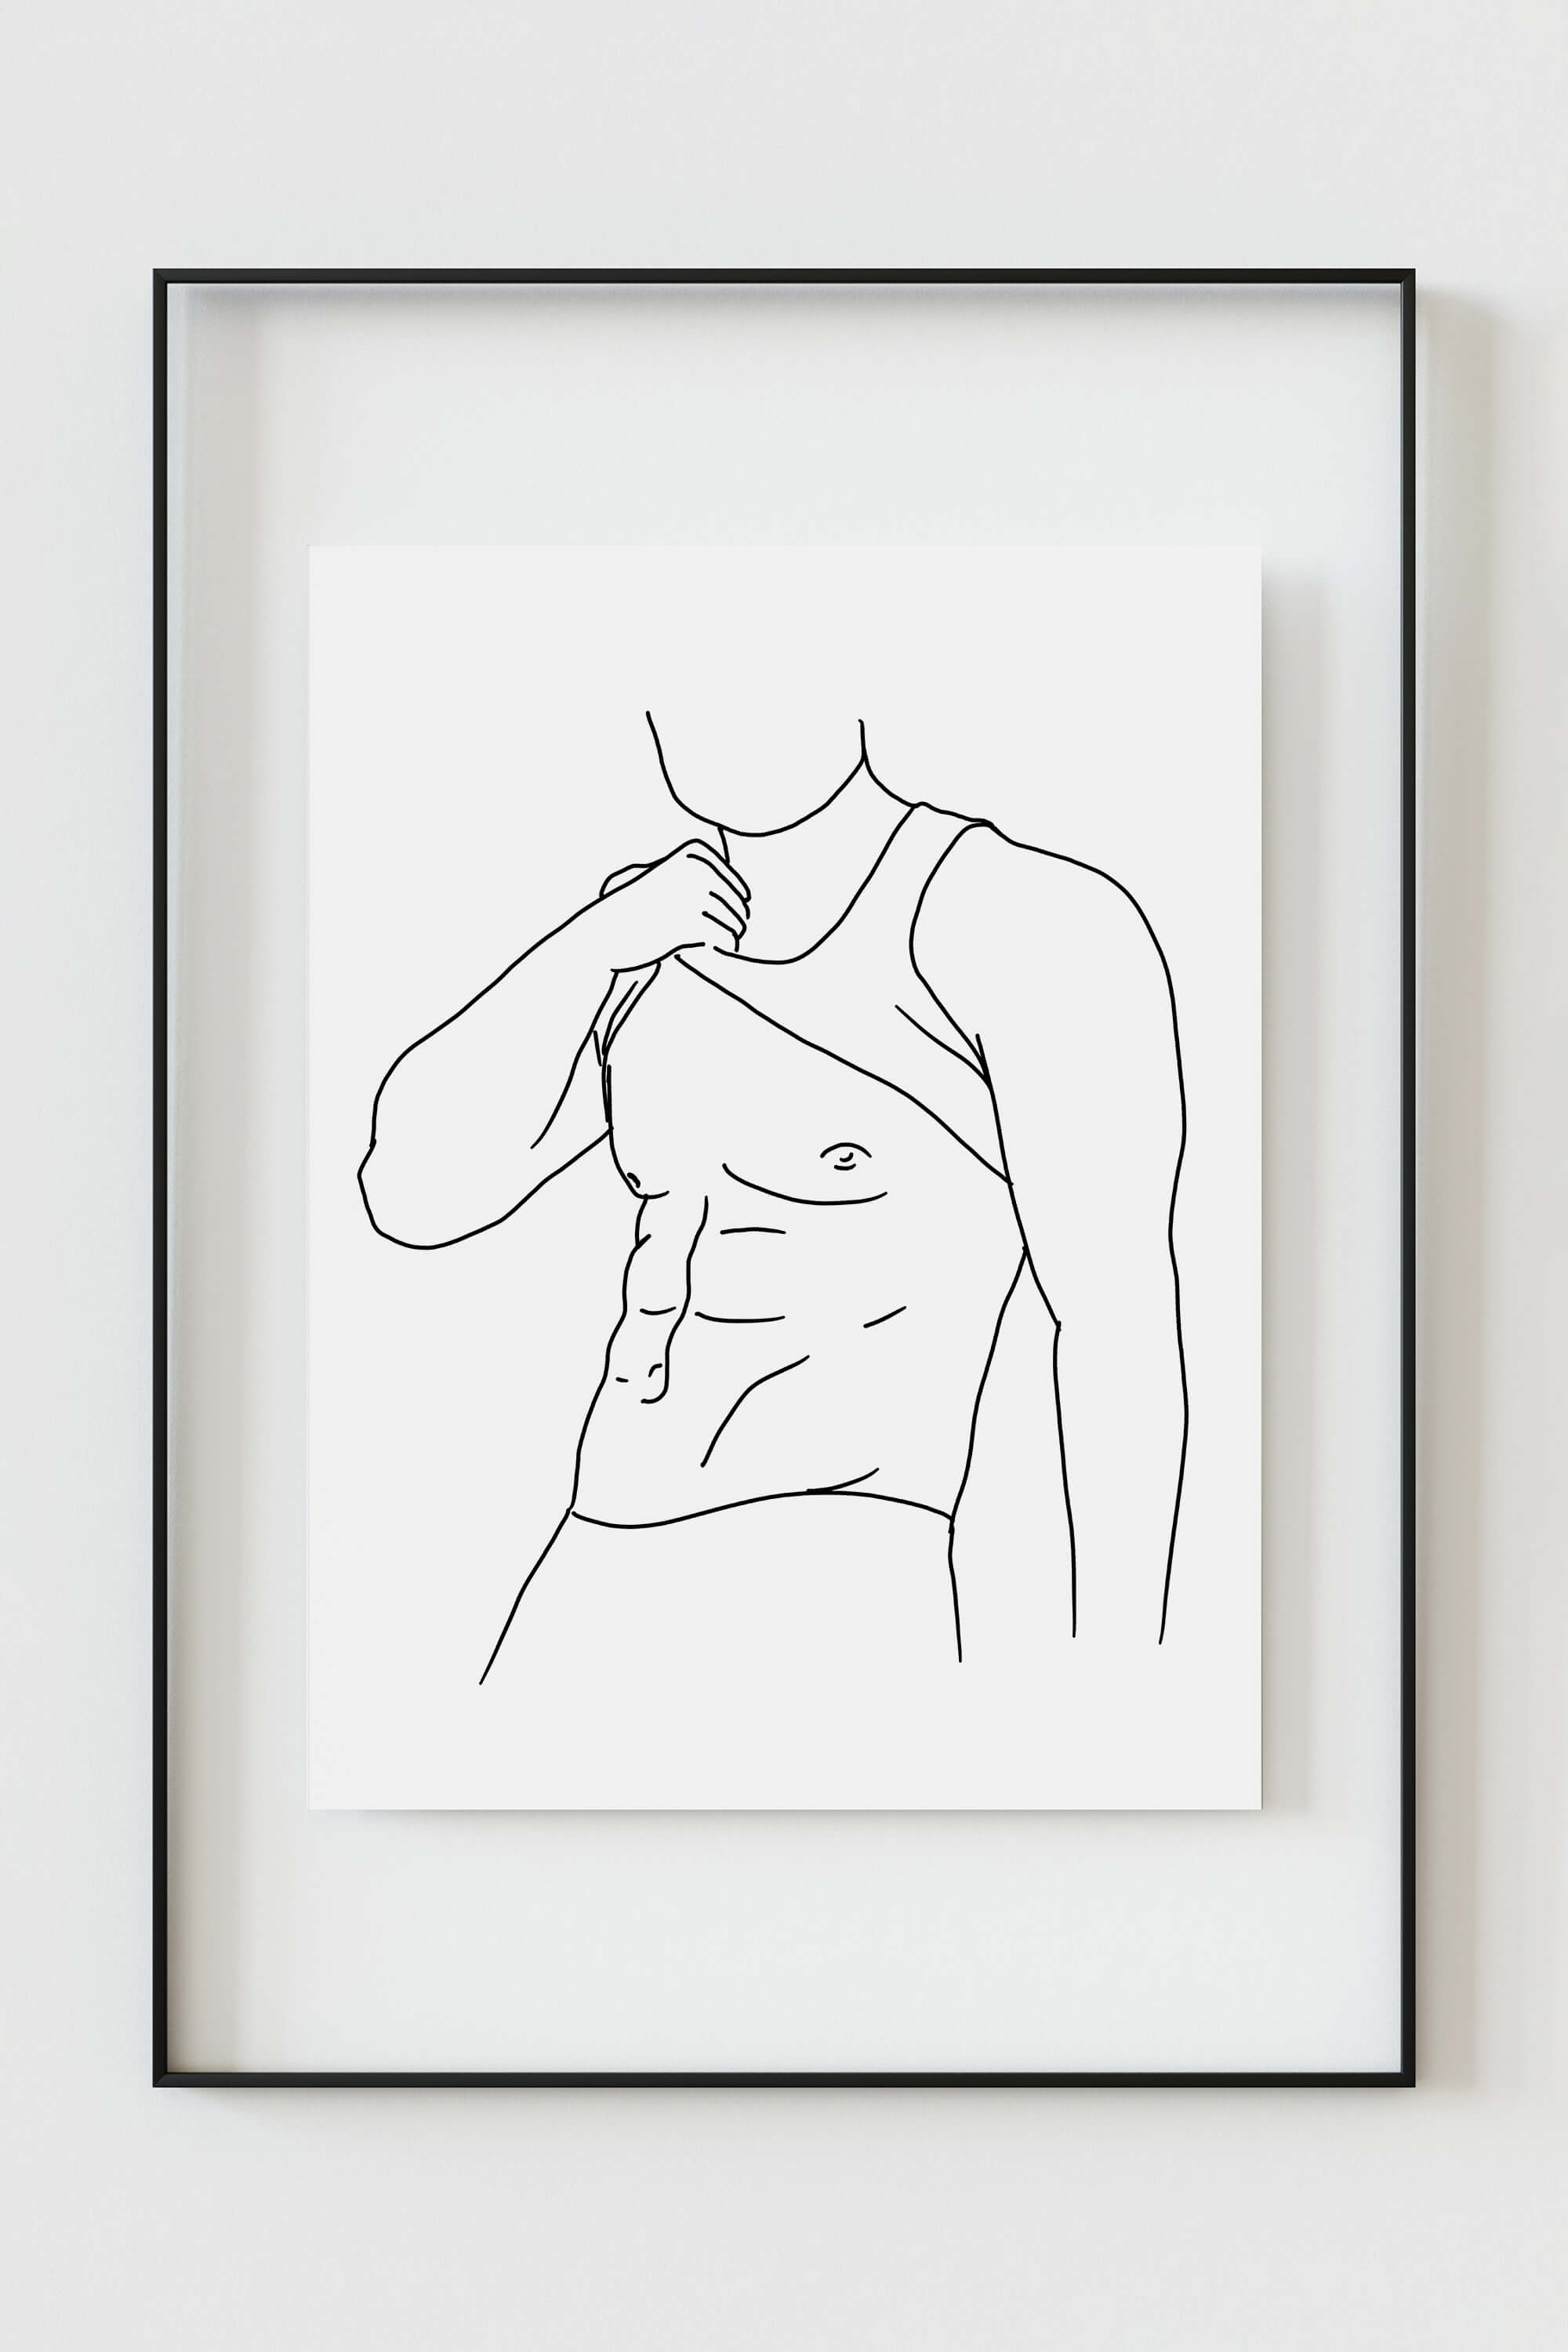 Discover the allure of naked male art with this passionate elegance poster. Intricate lines and monochromatic tones create a visually stunning work, blending sensuality with artistic refinement.